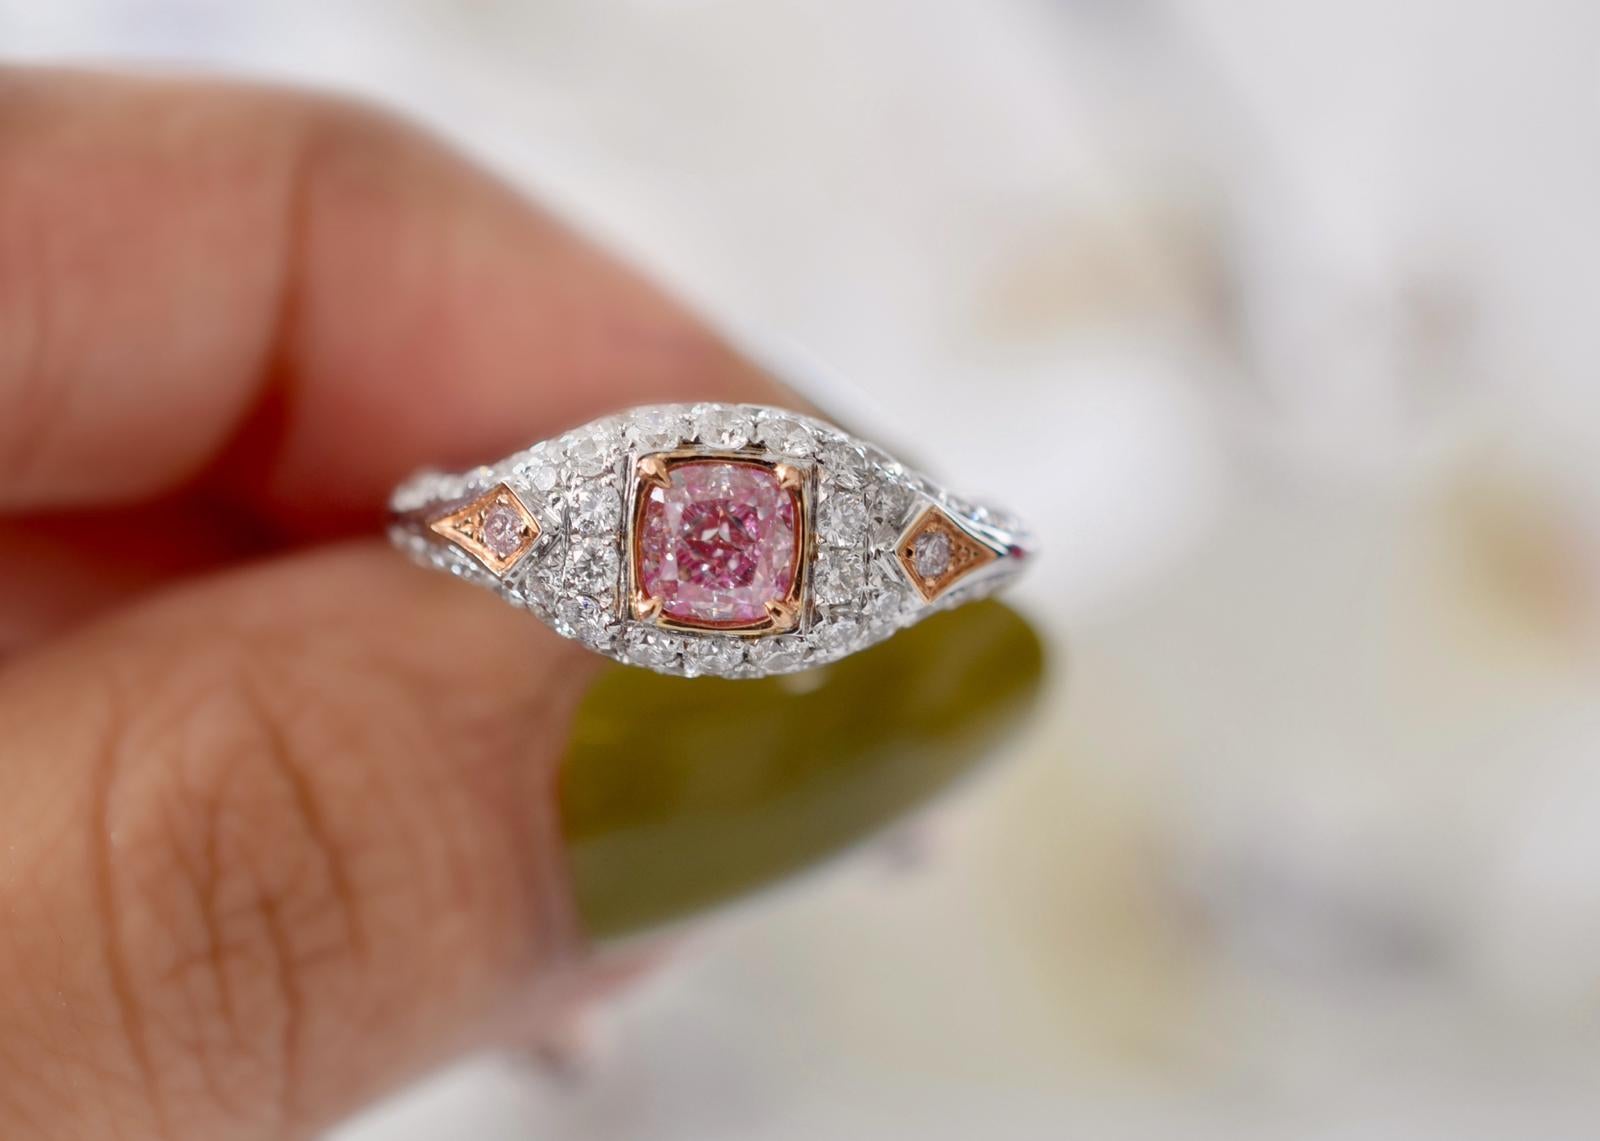 **100% NATURAL FANCY COLOUR DIAMOND JEWELLERIES**

✪ Jewelry Details ✪

♦ MAIN STONE DETAILS

➛ Stone Shape: Cushion
➛ Stone Color: Faint Pink
➛ Stone Weight: 0.71 carat
➛ Clarity: I1
➛ GIA certified

♦ SIDE STONE DETAILS

➛ Side White Diamonds- 60